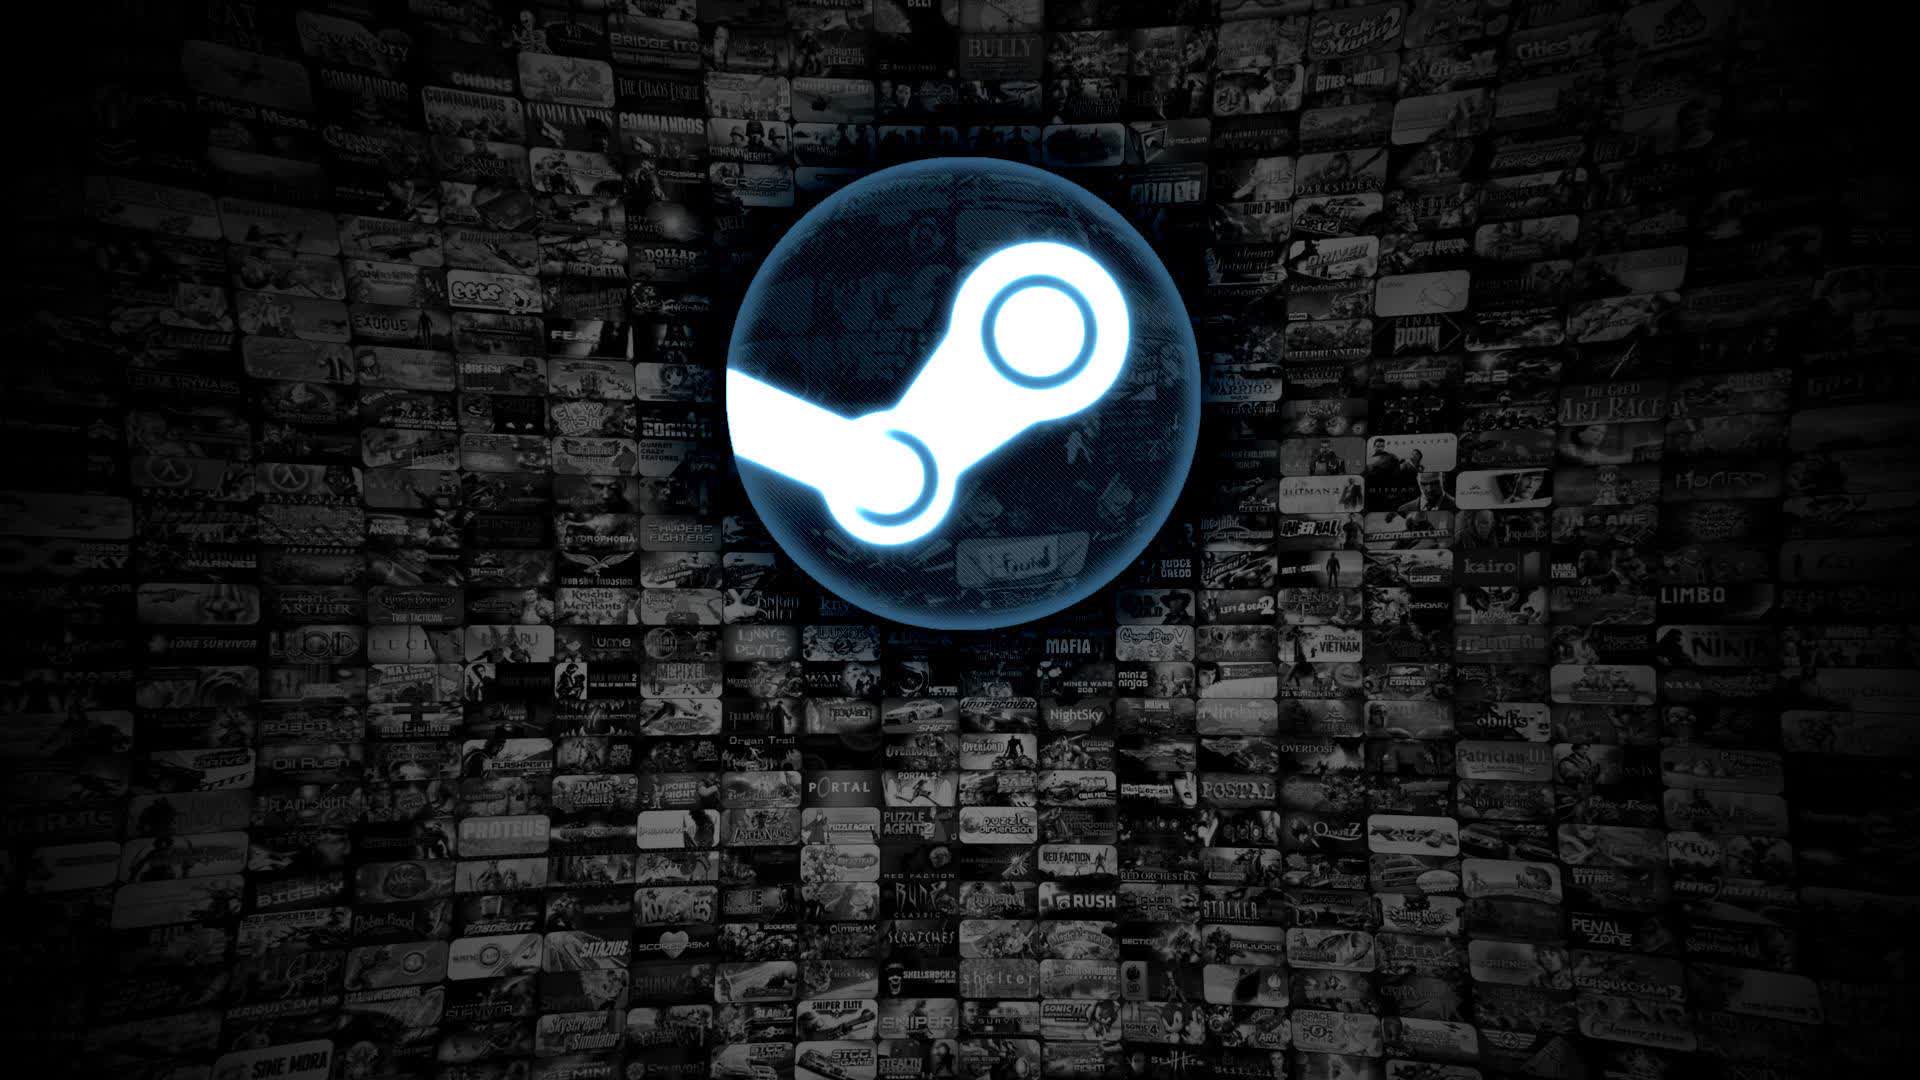 Steam's new Playtest tool lets you apply to test out upcoming games early